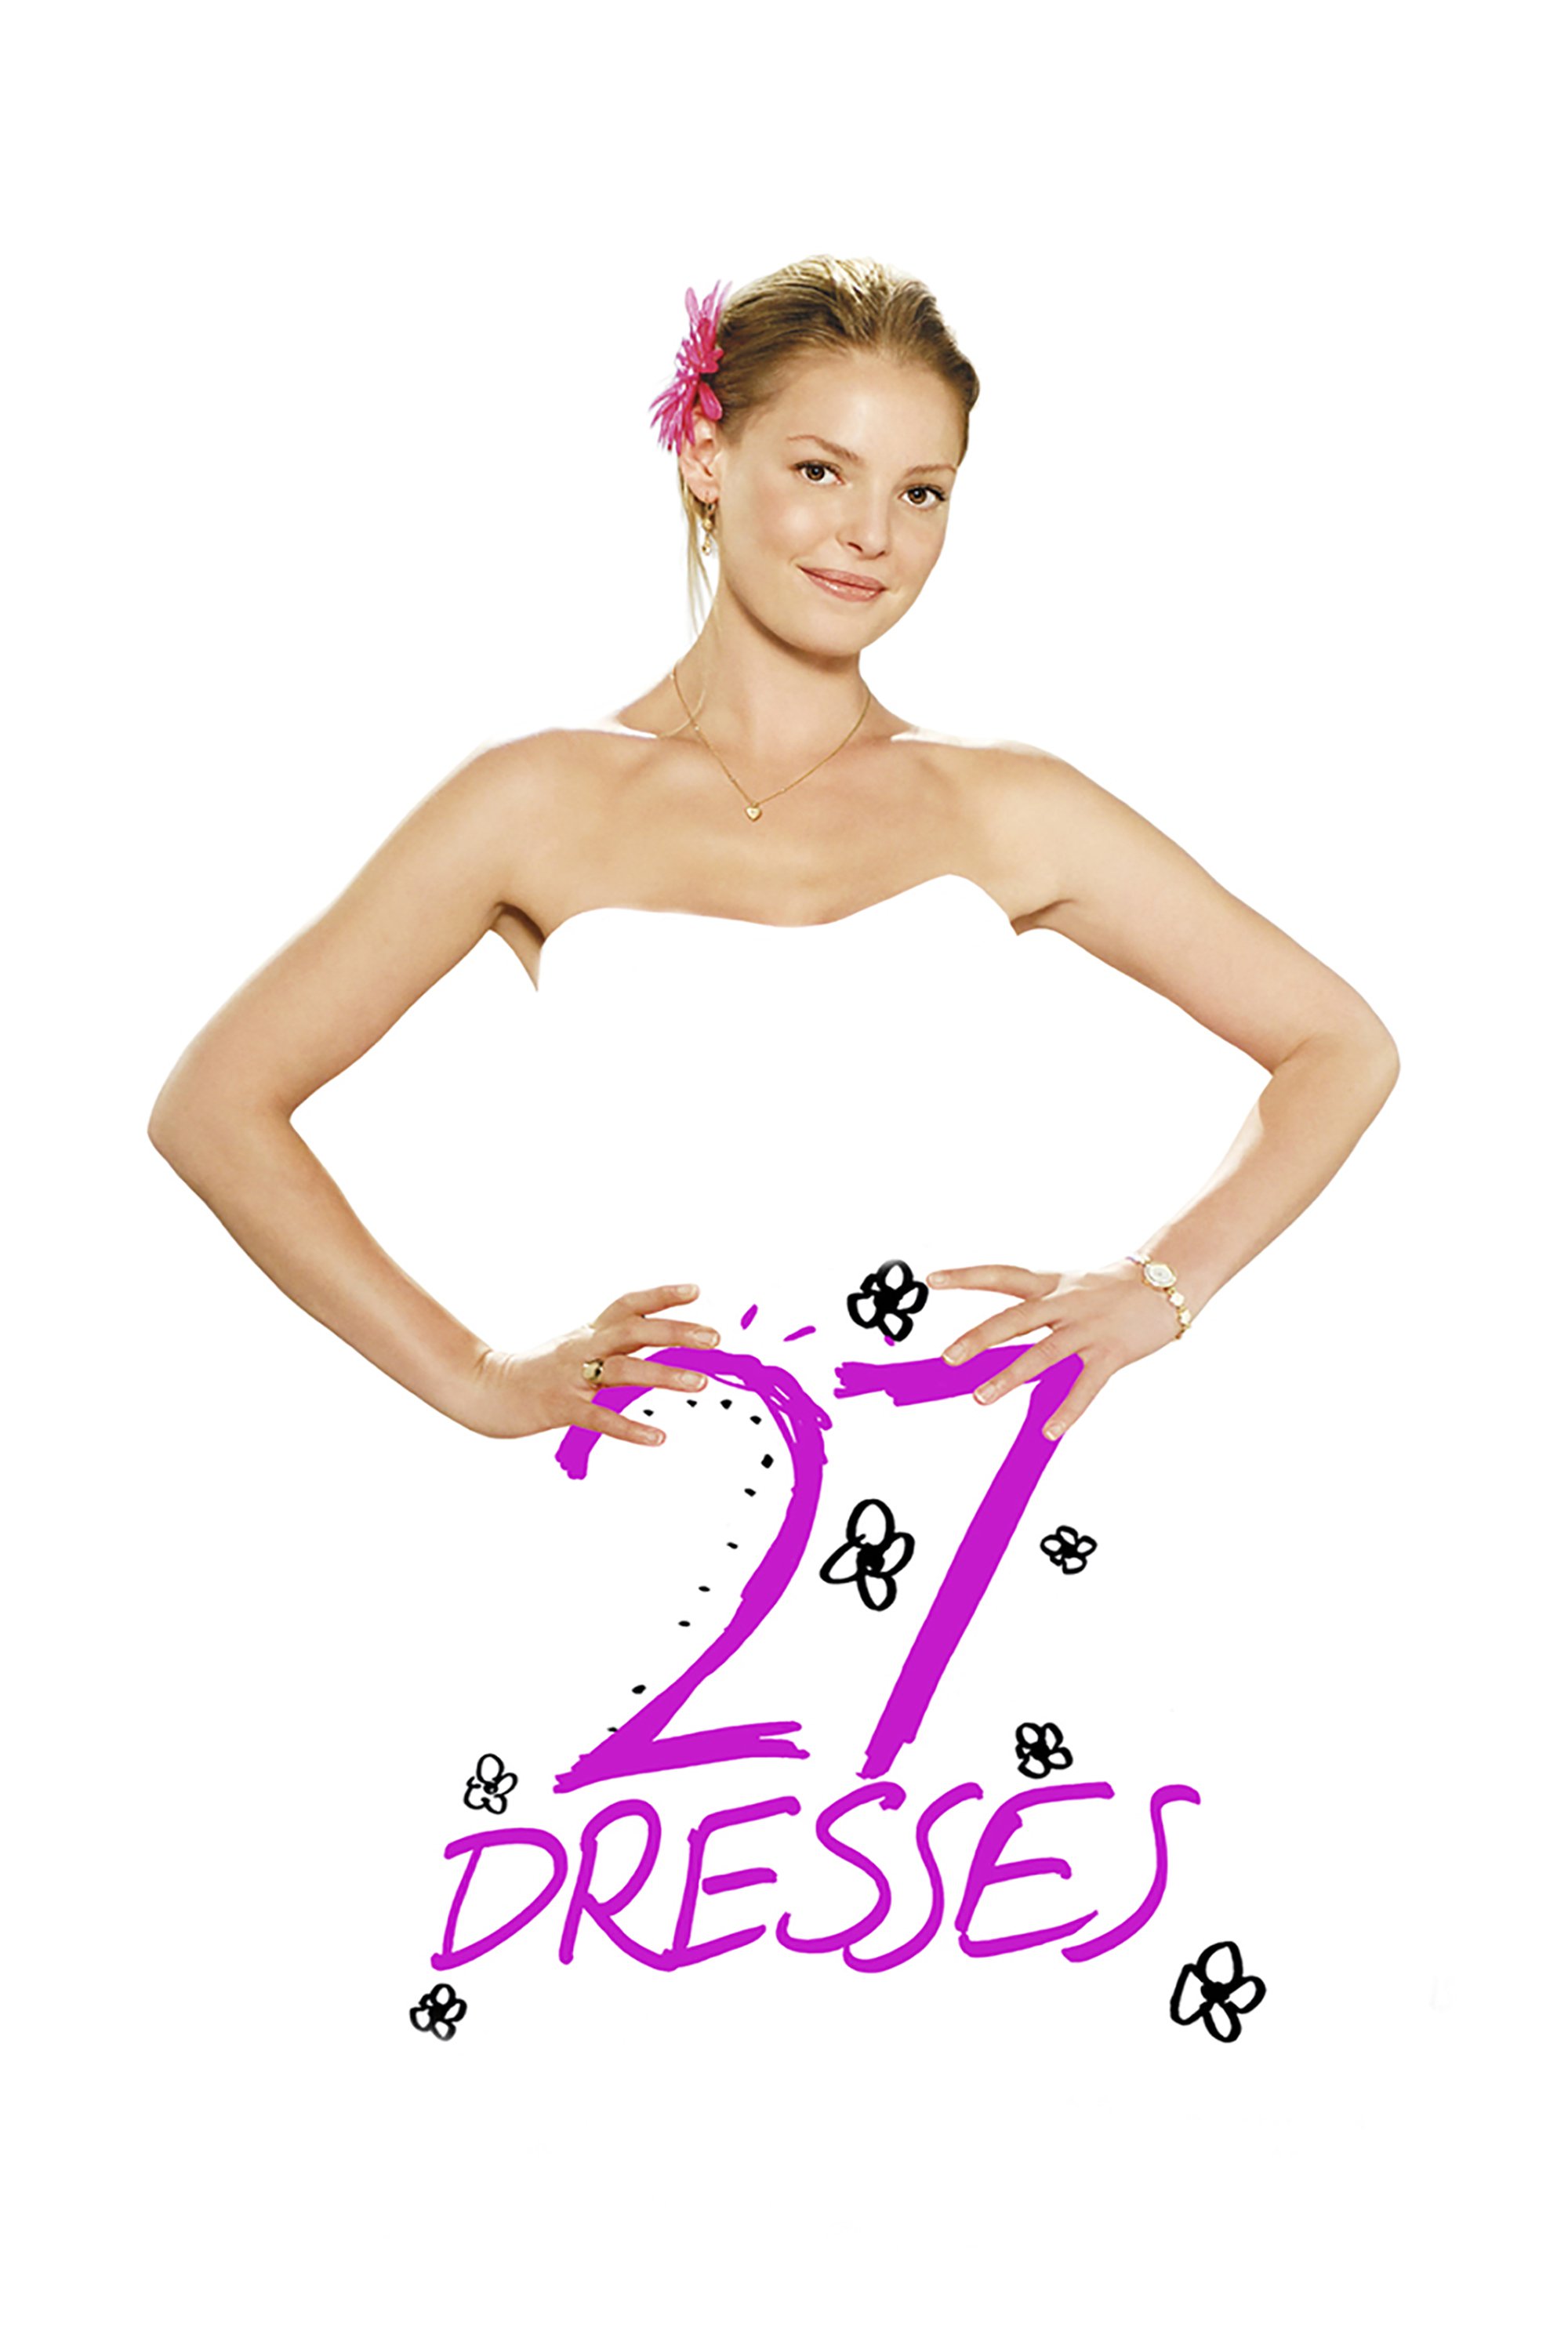 Poster for the movie "27 Dresses"